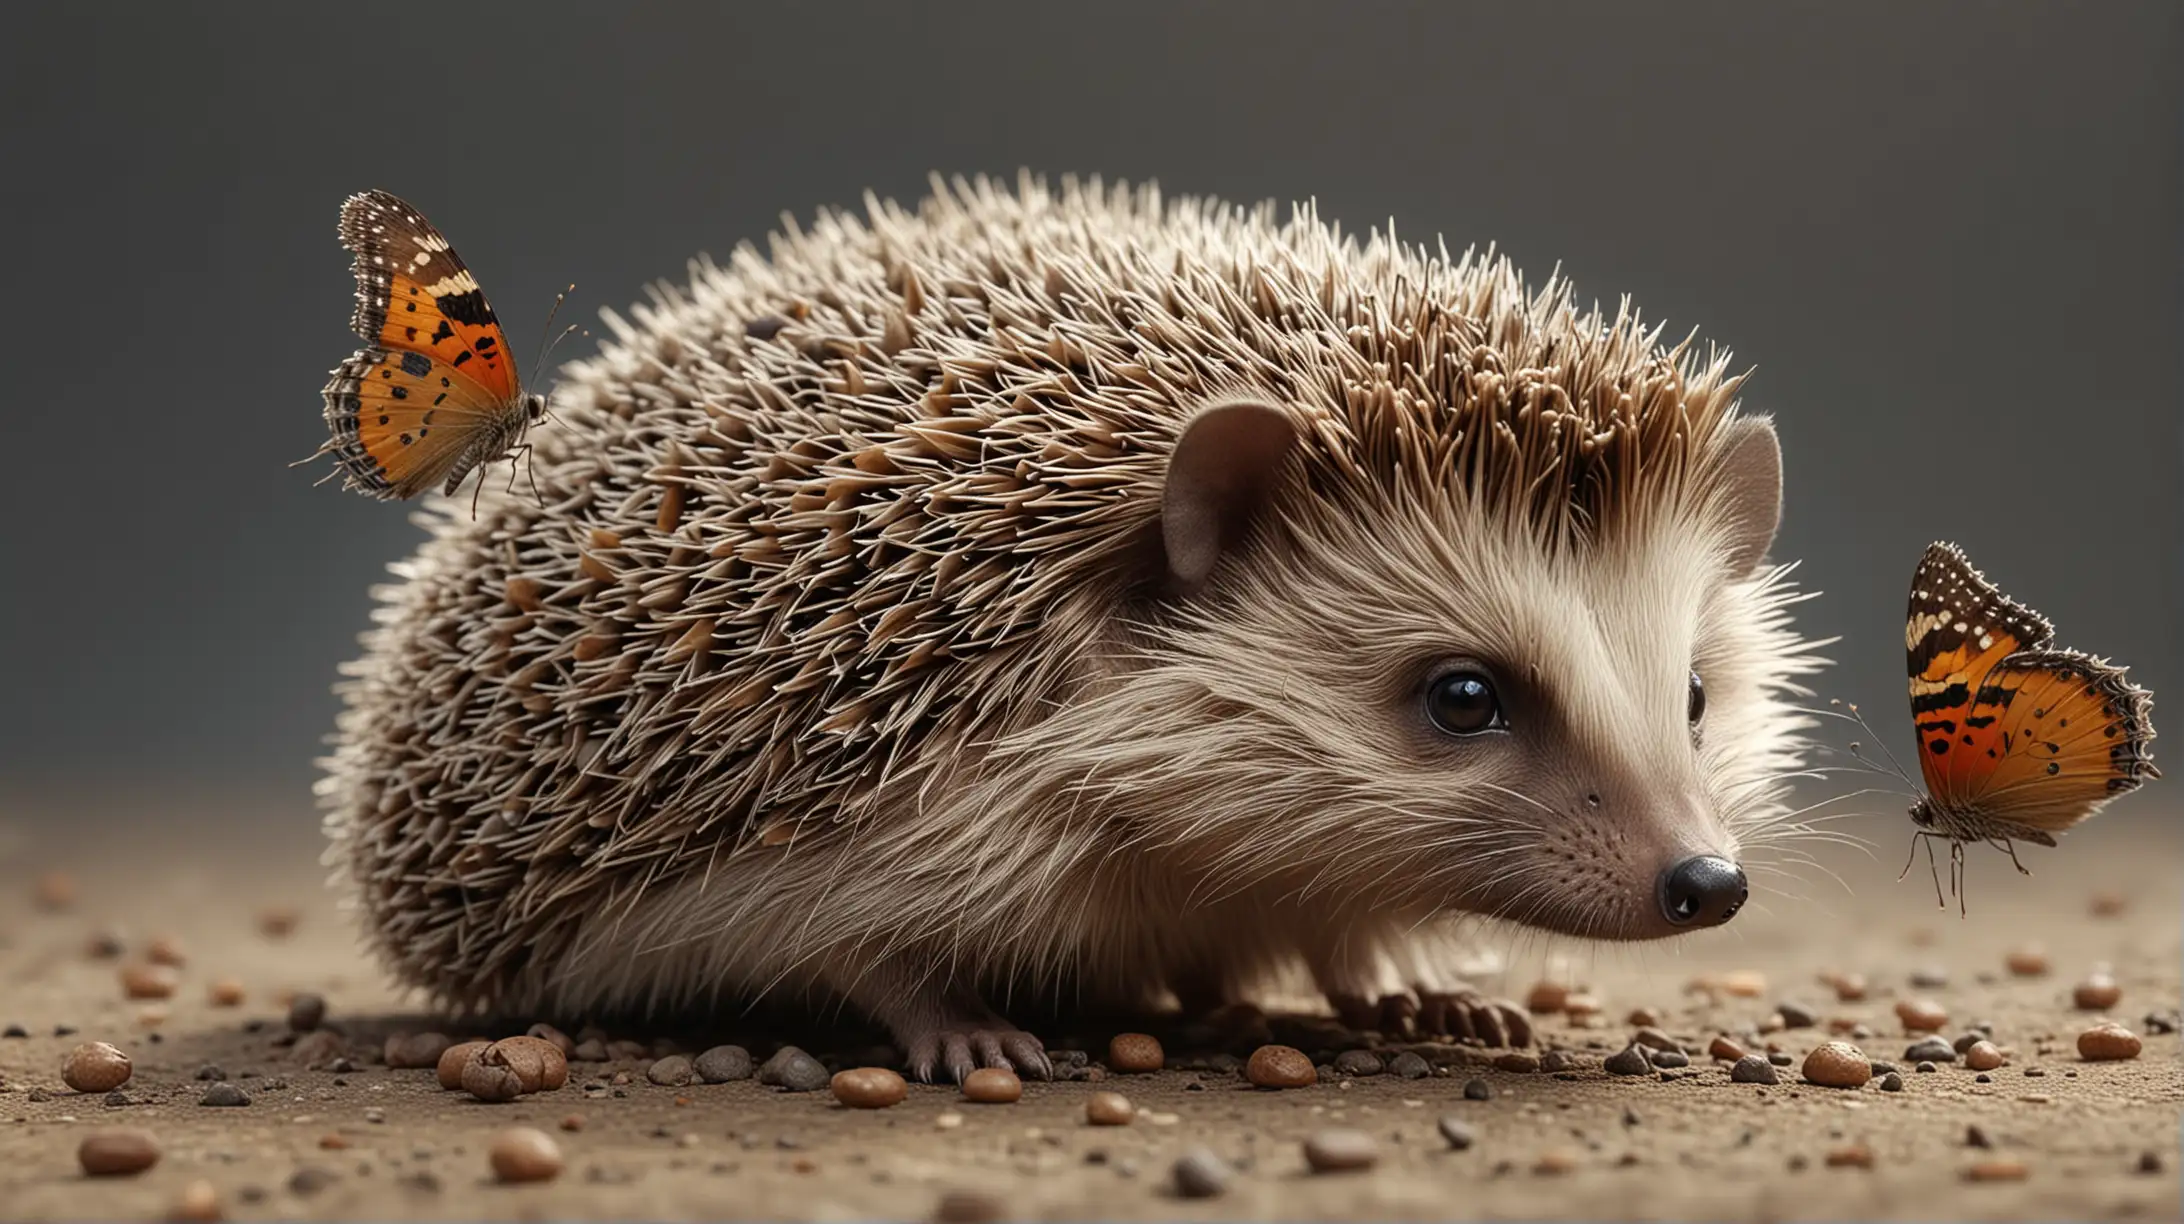 the offspring of a hedgehog and a butterfly
Highly detailed, 4k, hyper-realistic.